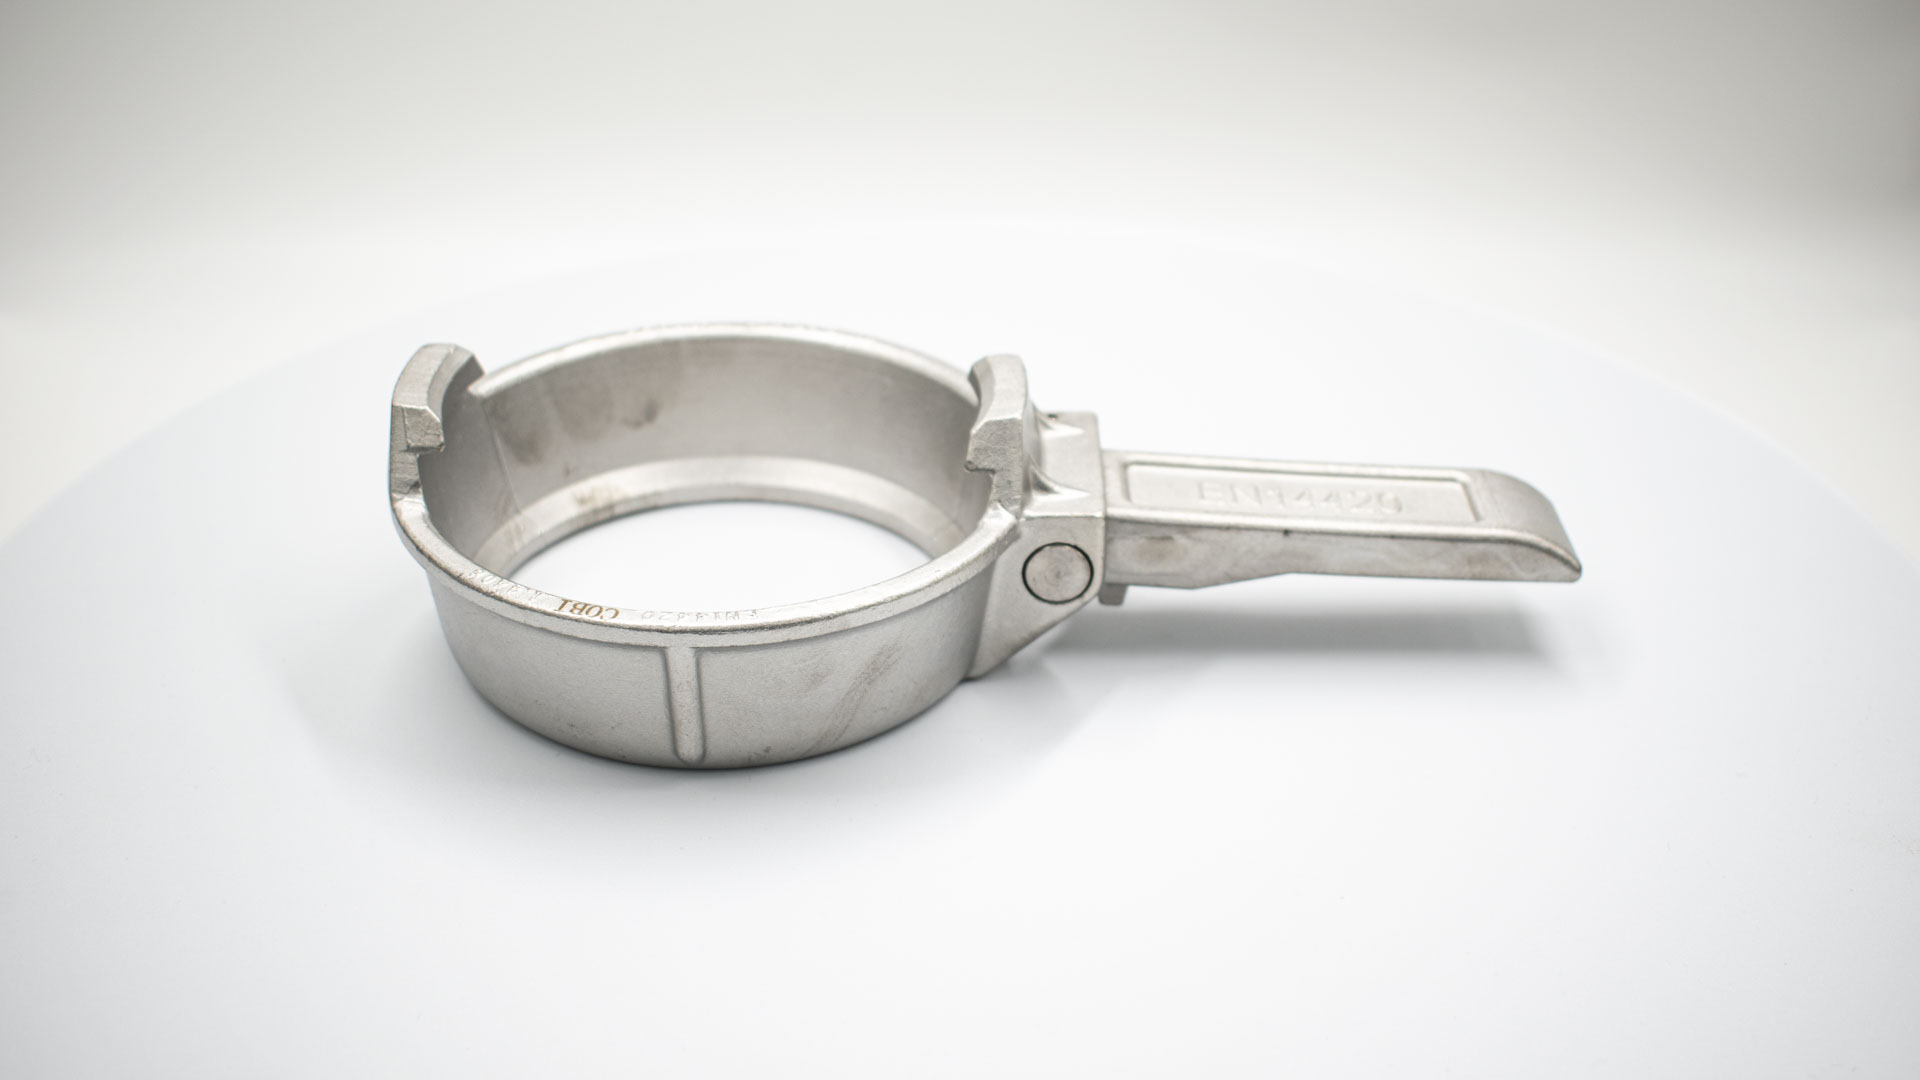 TW clamping ring with lever made of stainless steel according to DIN EN 14420-6 (DIN 28450)